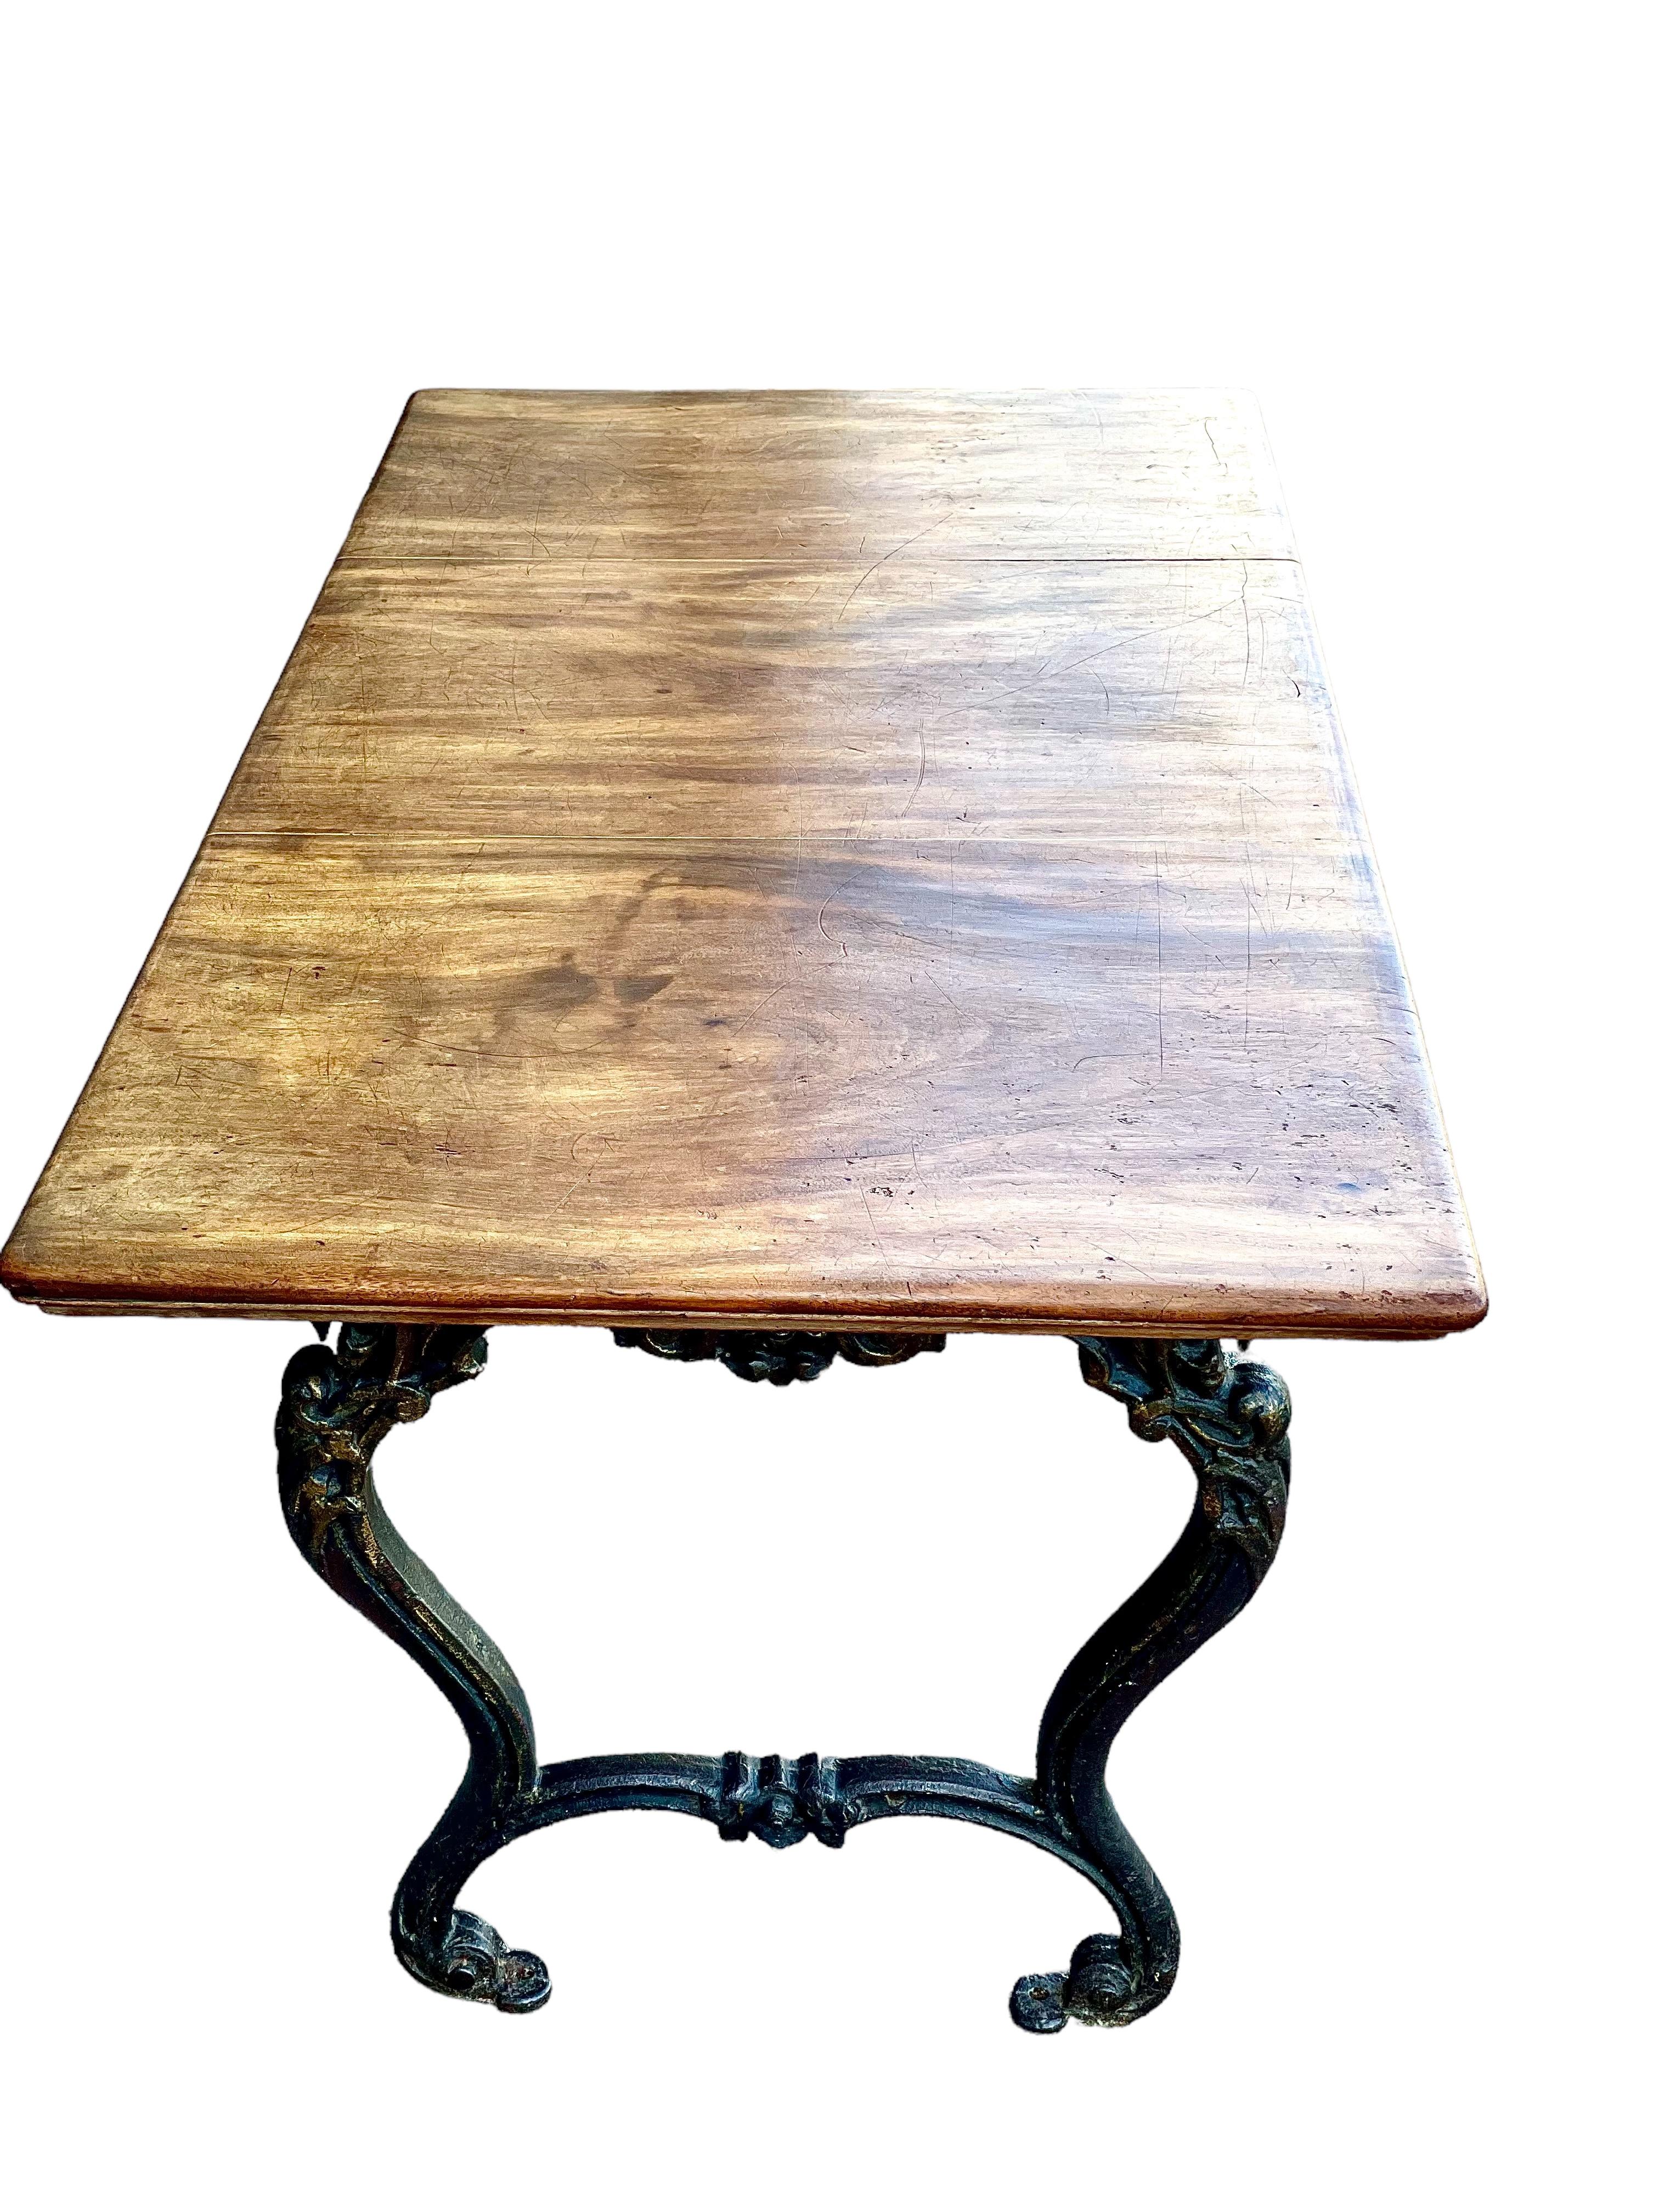 Spanish Antique Dining Table with Cast Iron Legs and Walnut Top